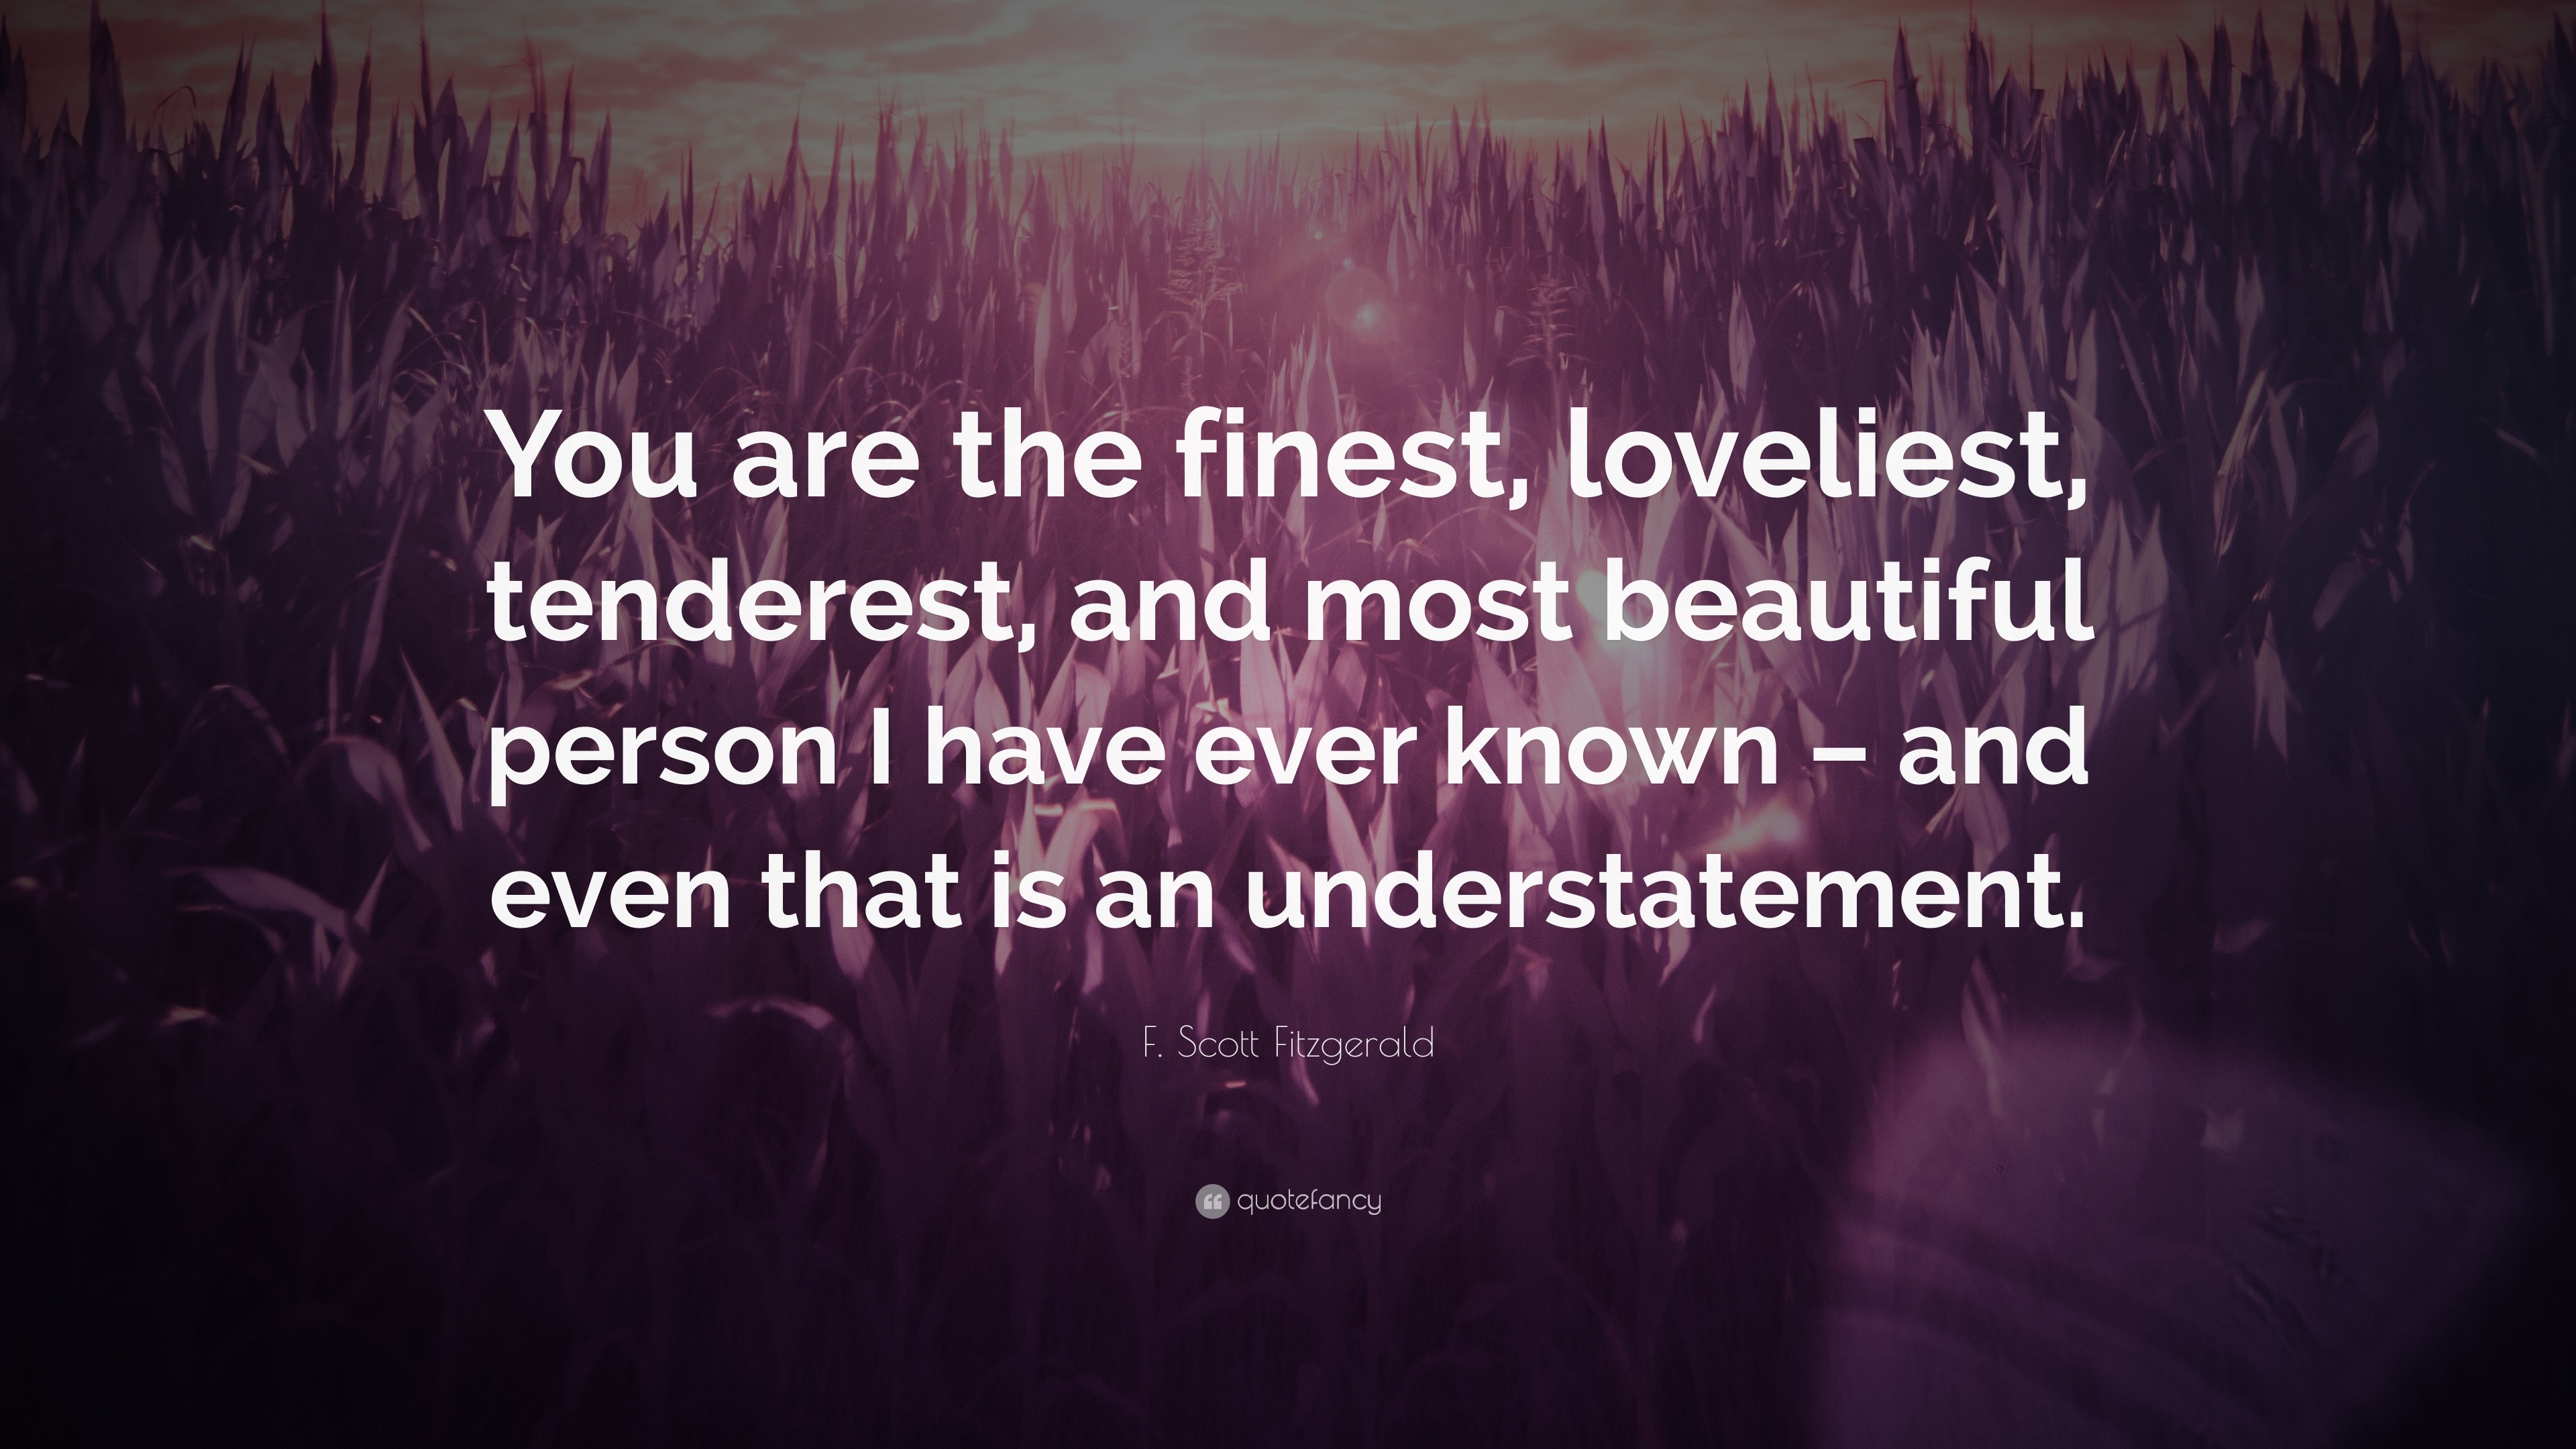 F. Scott Fitzgerald Quote: “You are the finest, loveliest, tenderest ...